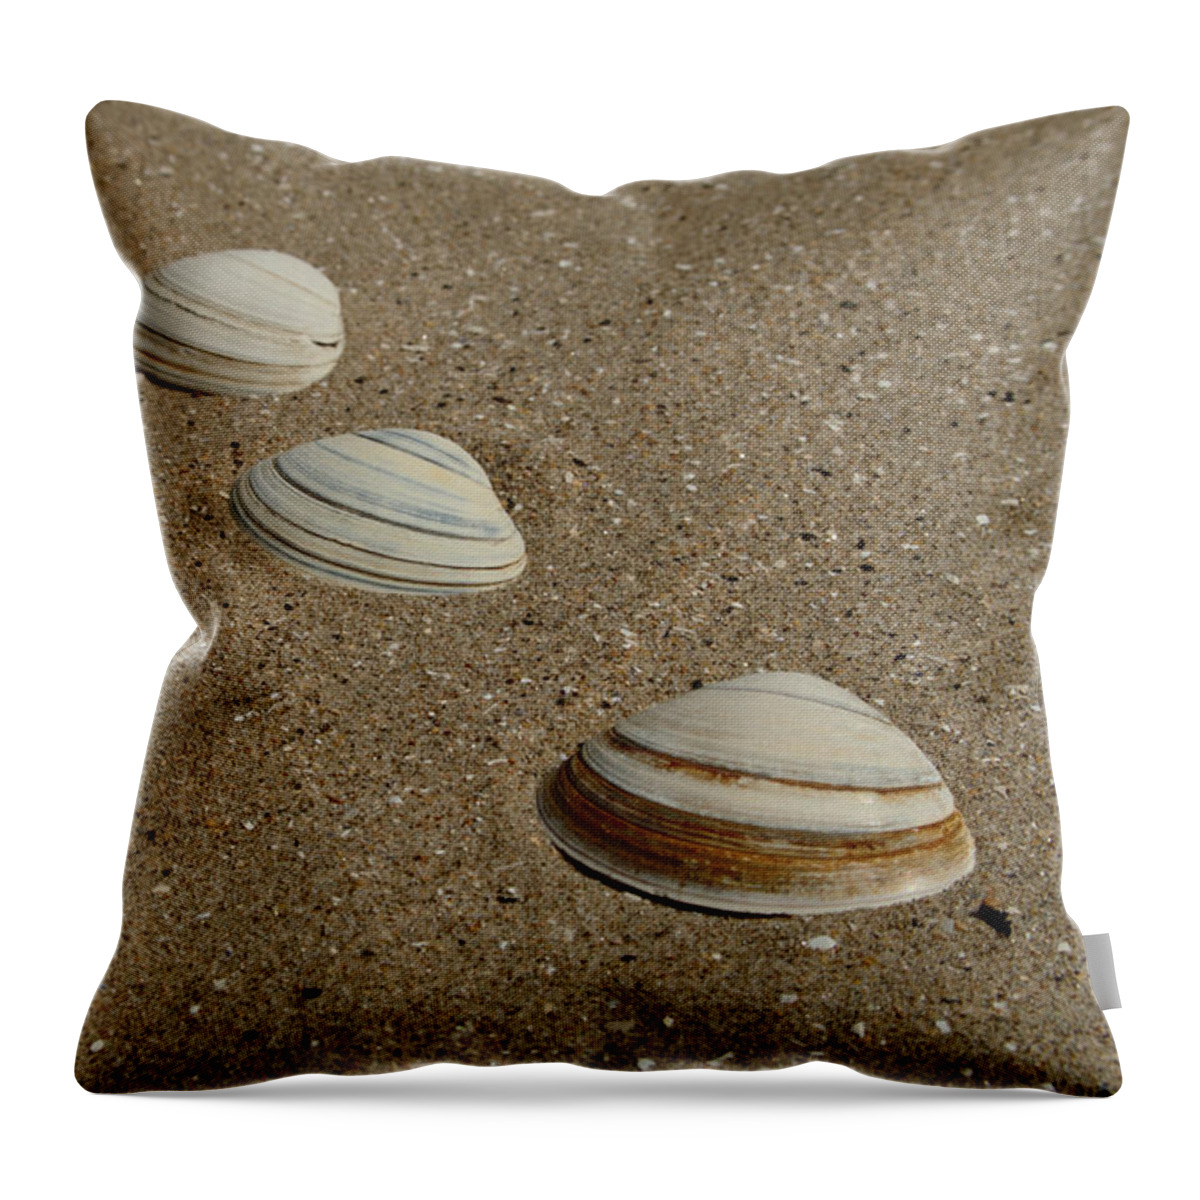 Three Throw Pillow featuring the photograph Three Shells West Sands by Adrian Wale